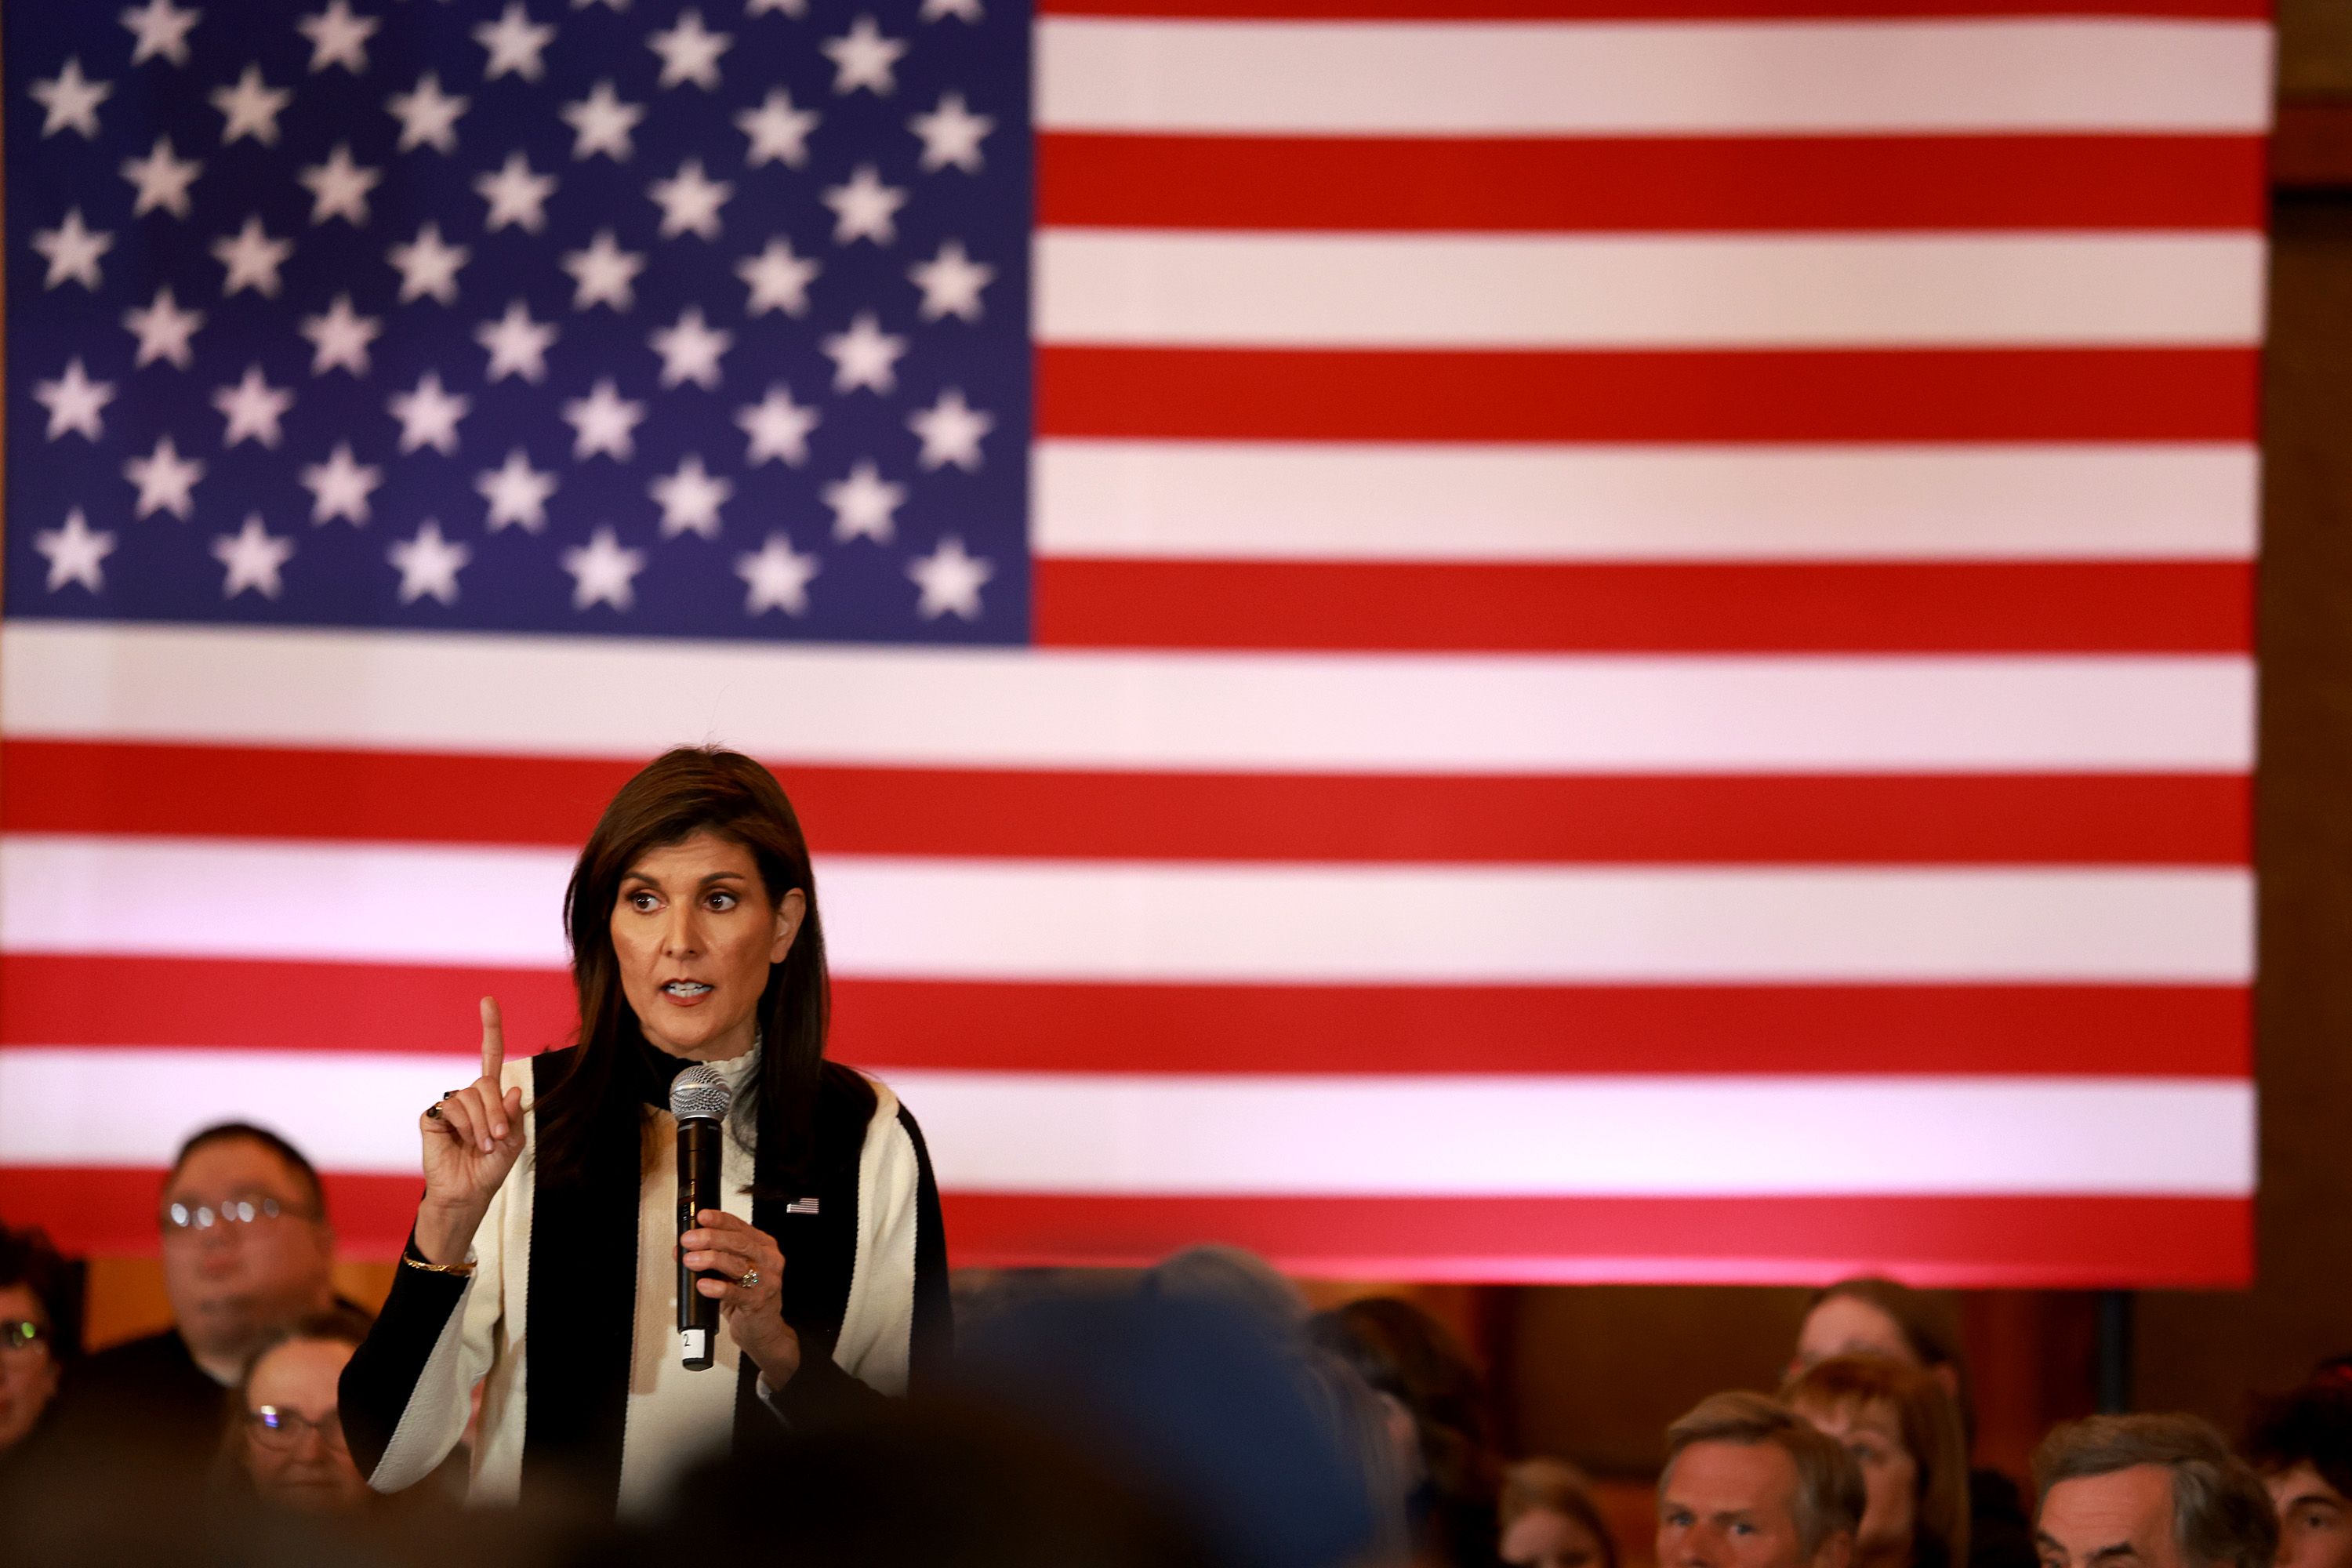 Republican presidential candidate former U.N. Ambassador Nikki Haley speaks at a campaign event at Country Lane Lodge on January 14, 2024 in Adel, Iowa. Iowa Republicans will be the first to select their party's nominee for the 2024 presidential race when they go to caucus on January 15, 2024.